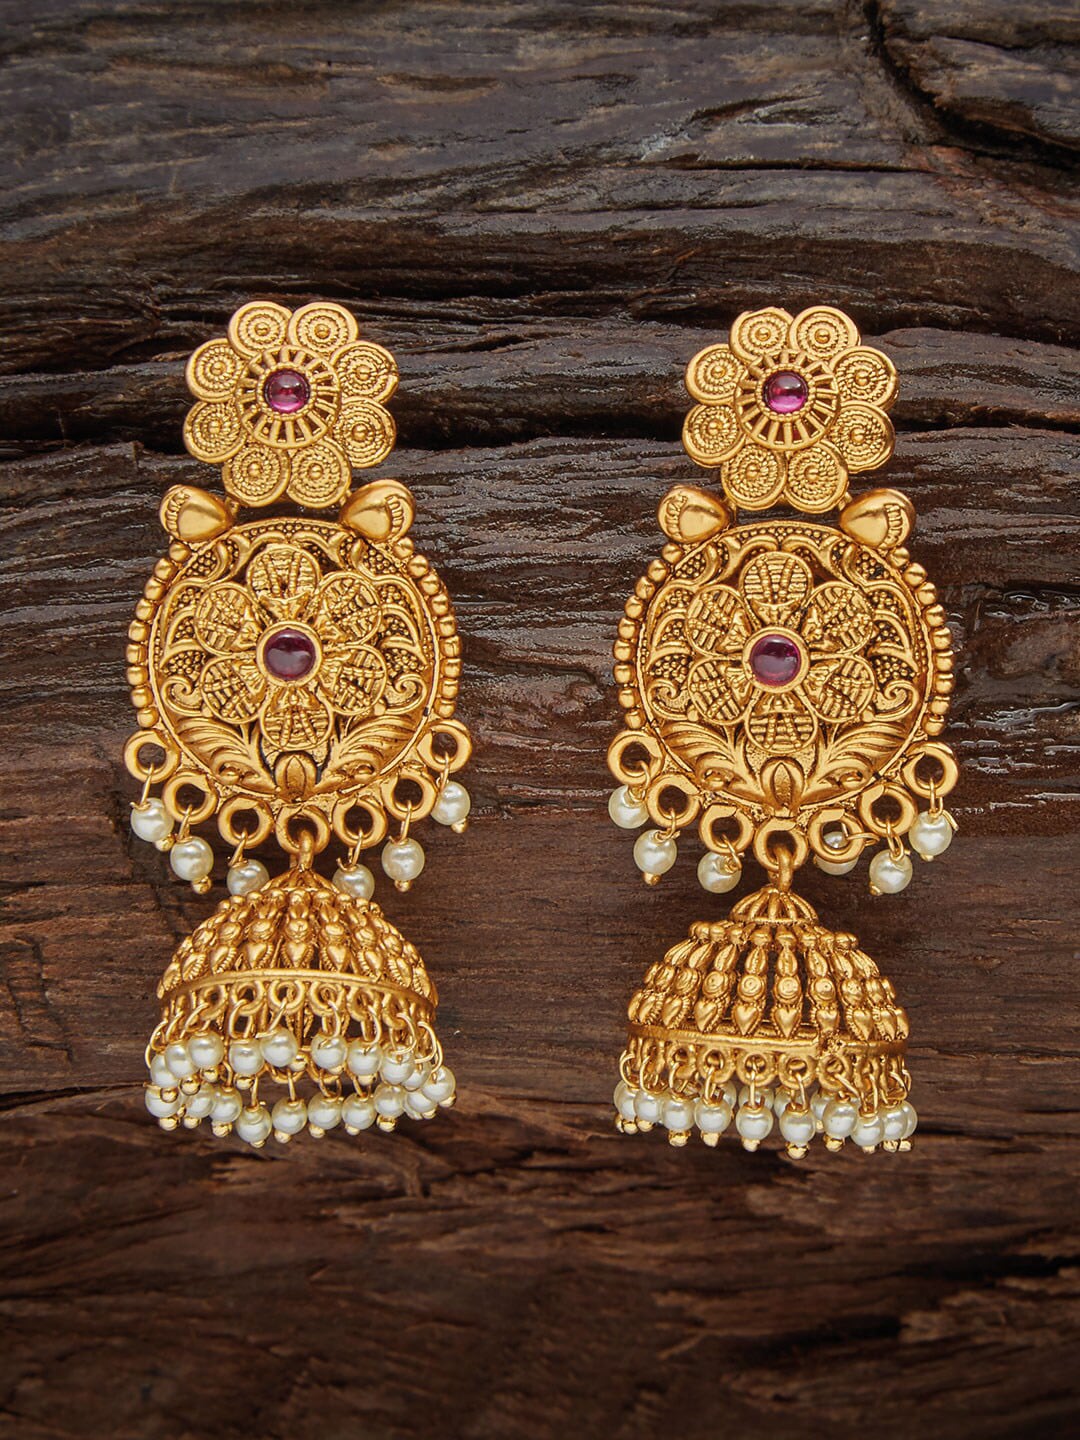 Kushal's Fashion Jewellery Gold-Plated Magenta & White Antique Jhumkas Earrings Price in India